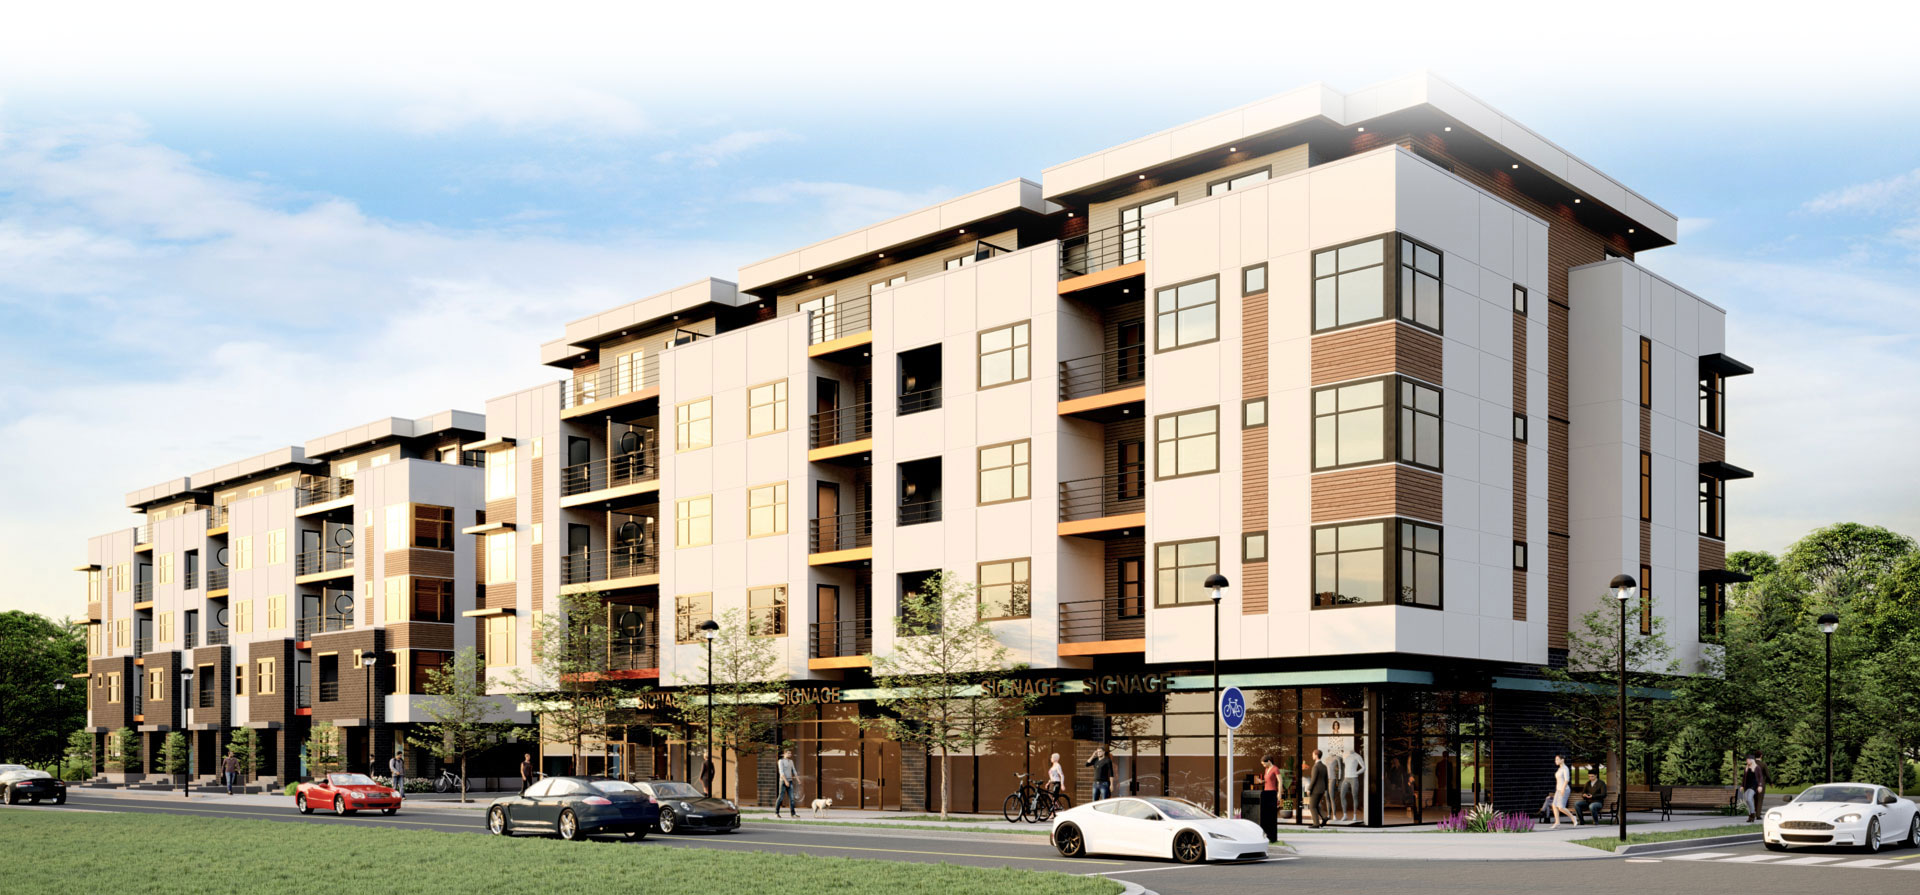 Douglas Green Living by Panorama West – Plans, Availability, Prices